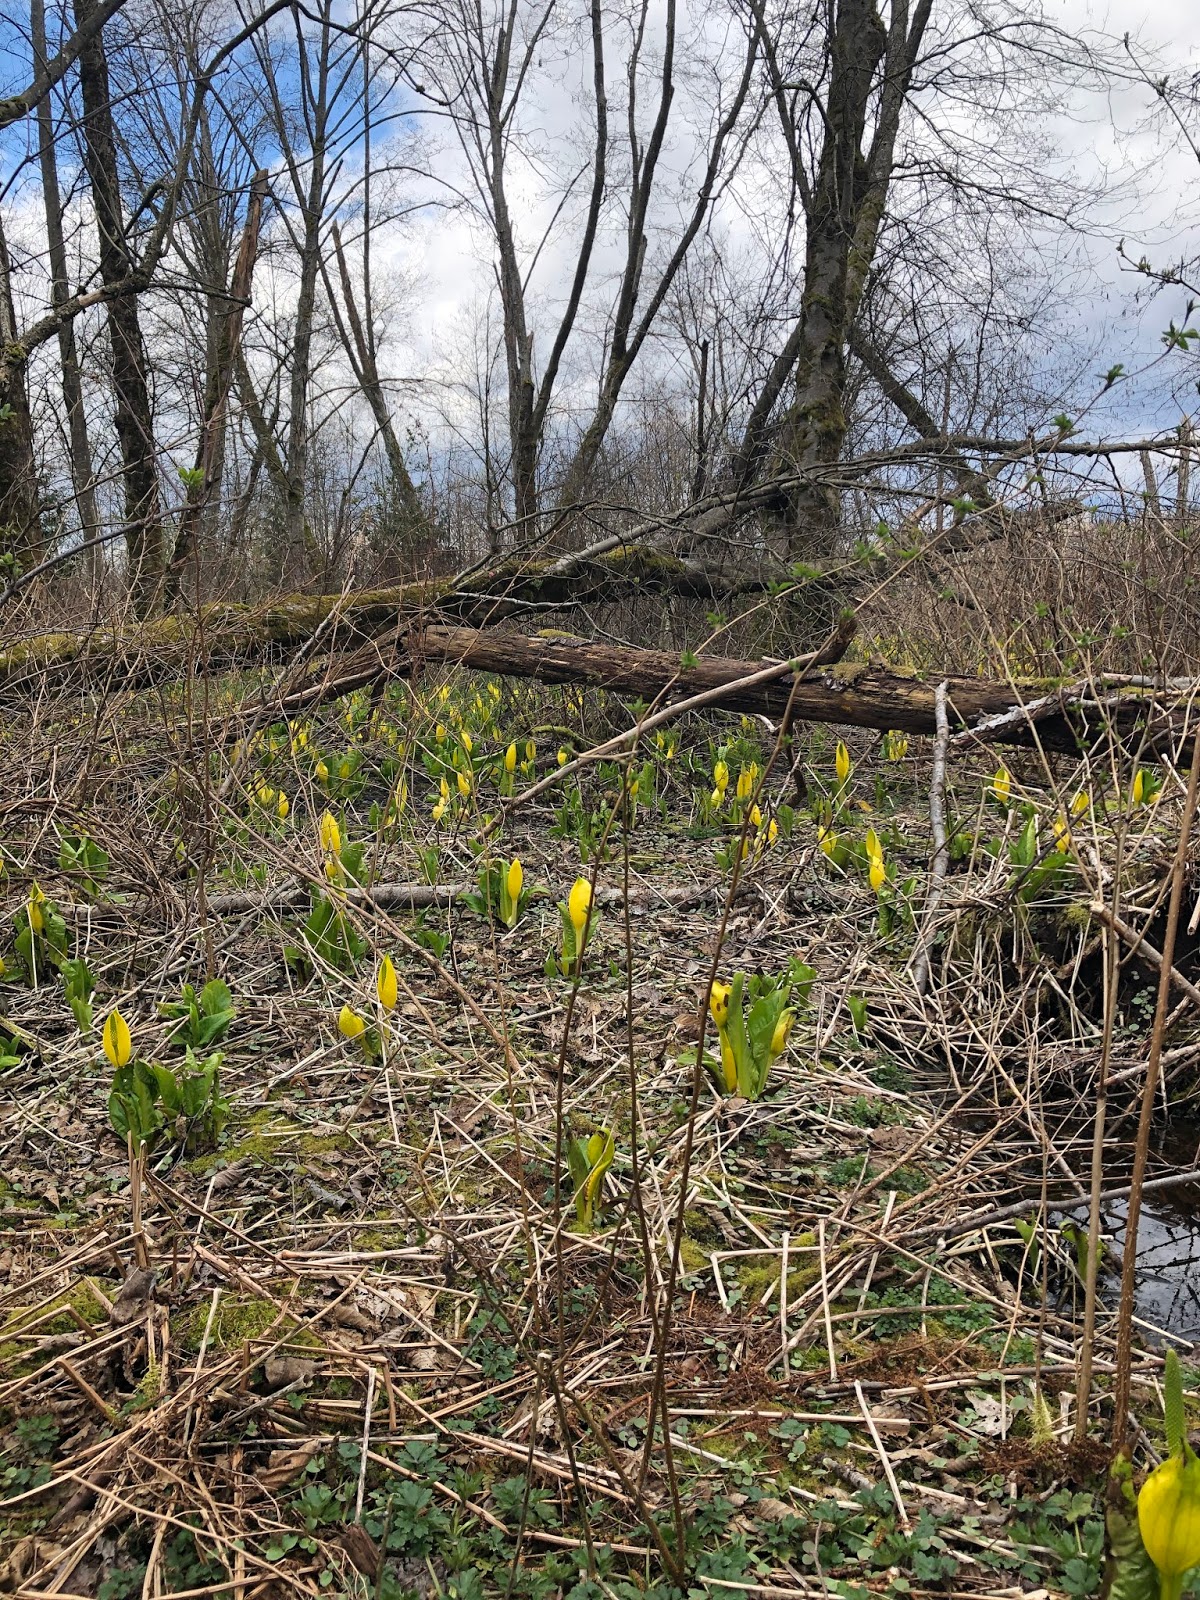 Time and Skunk Cabbage Wait for No WoMan (or Covid, for that matter)